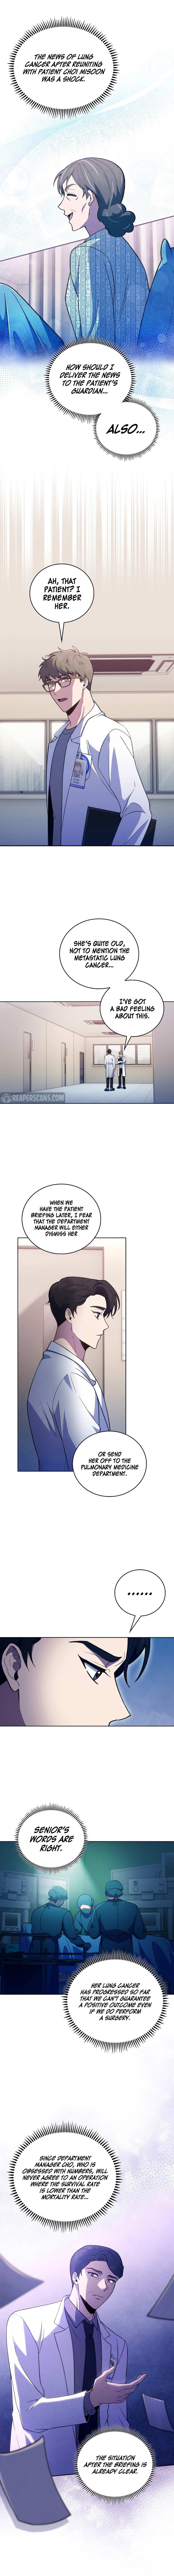 Level-Up Doctor (Manhwa) - Page 1